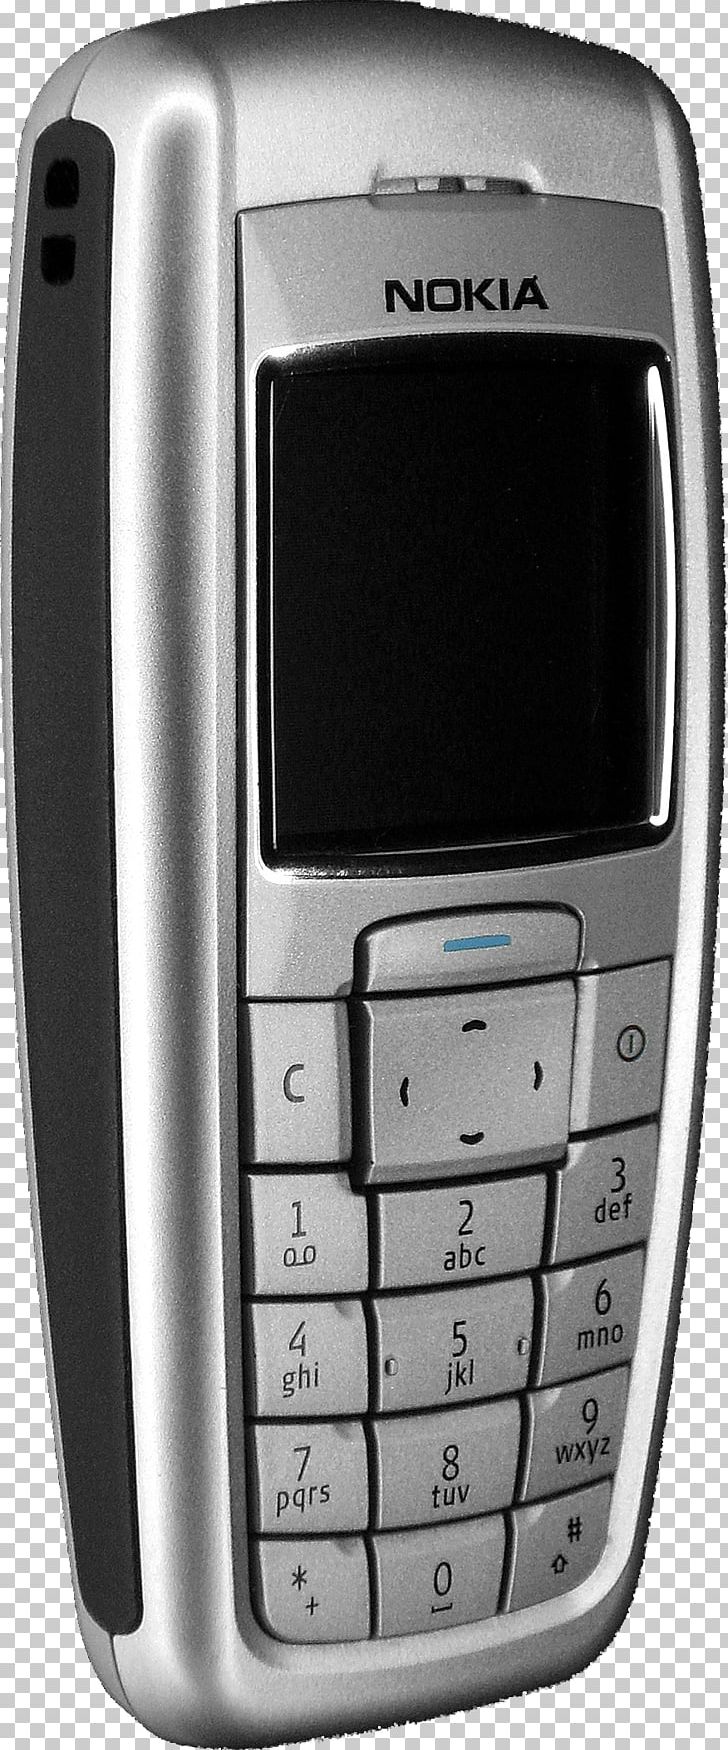 Feature Phone Nokia 2110 Nokia Lumia 1520 Nokia Lumia 720 PNG, Clipart, Cellular Network, Com, Electronic Device, Feature Phone, Gadget Free PNG Download